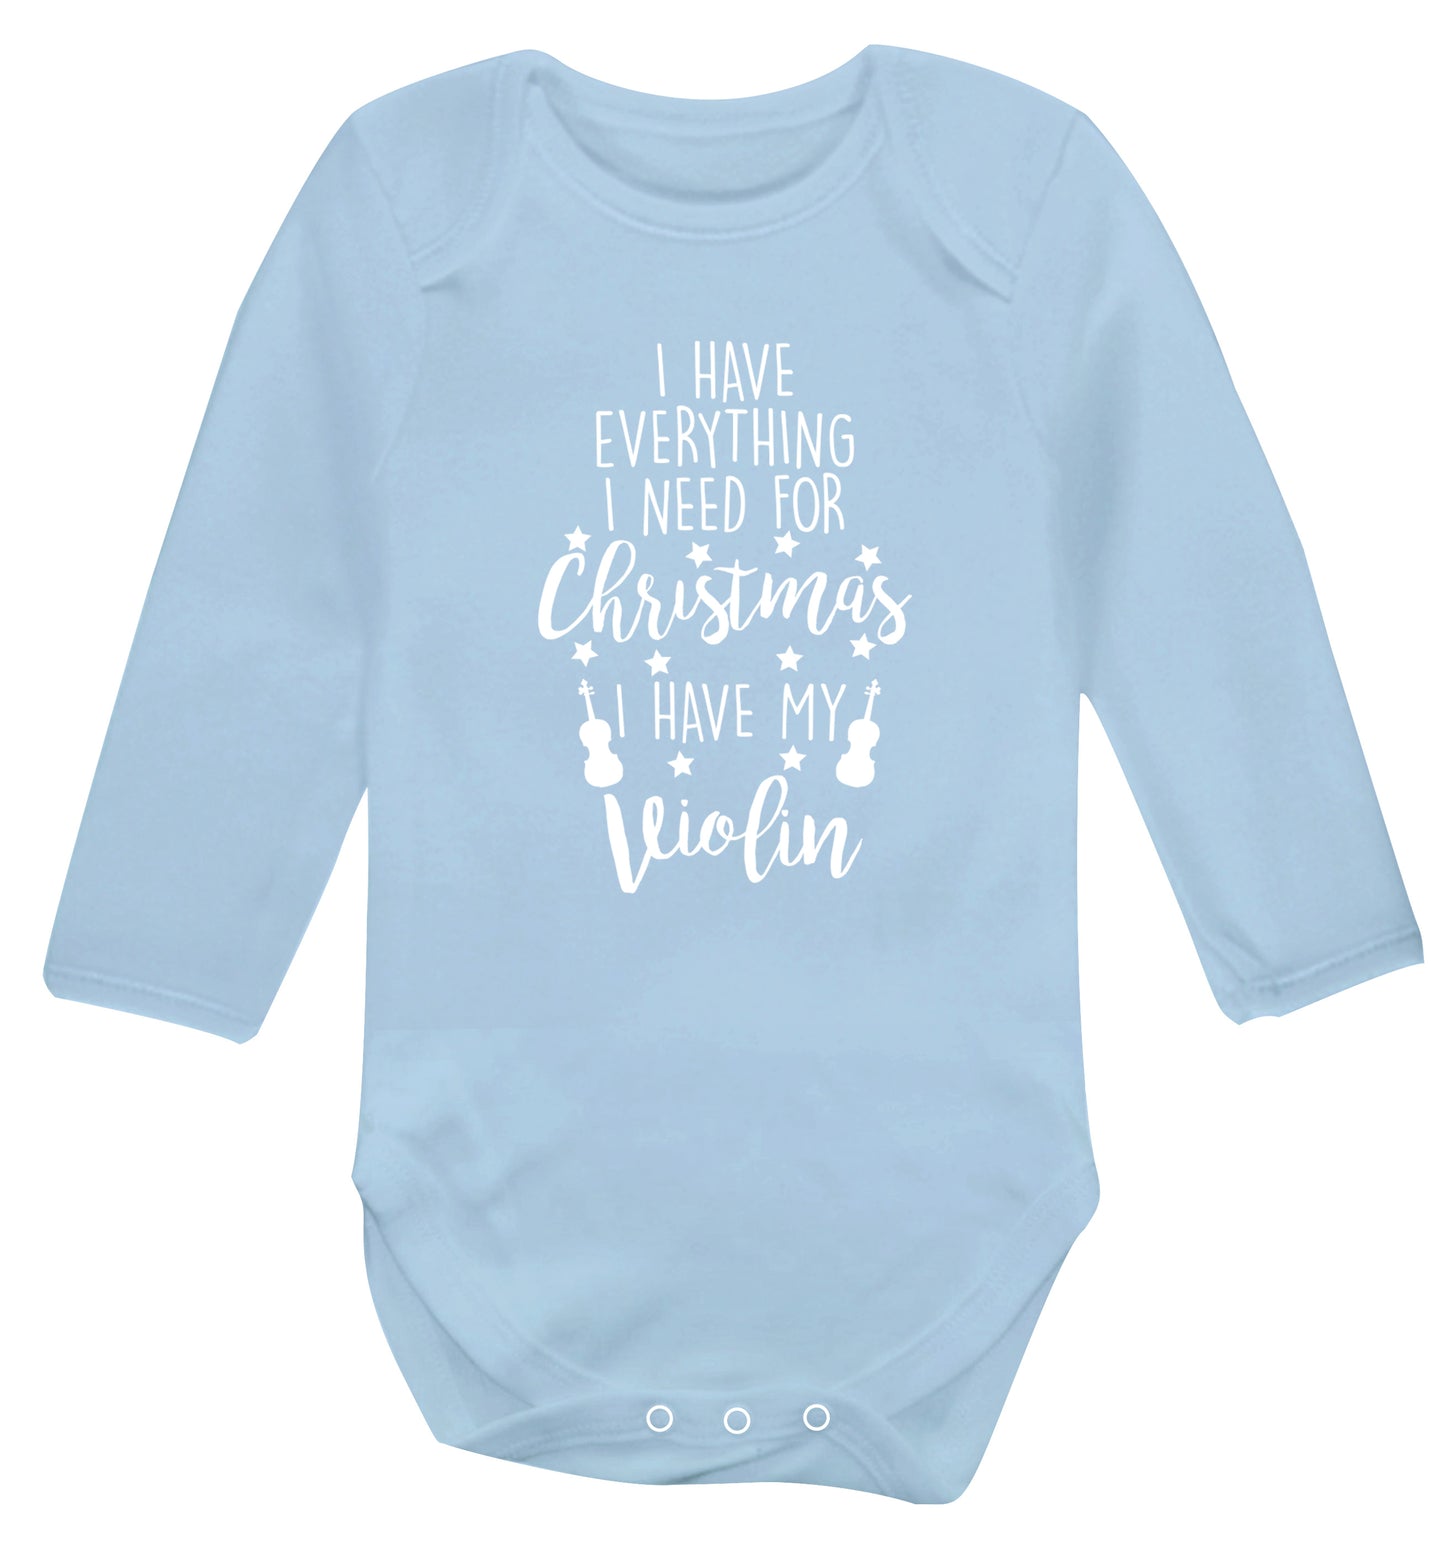 I have everything I need for Christmas I have my violin Baby Vest long sleeved pale blue 6-12 months